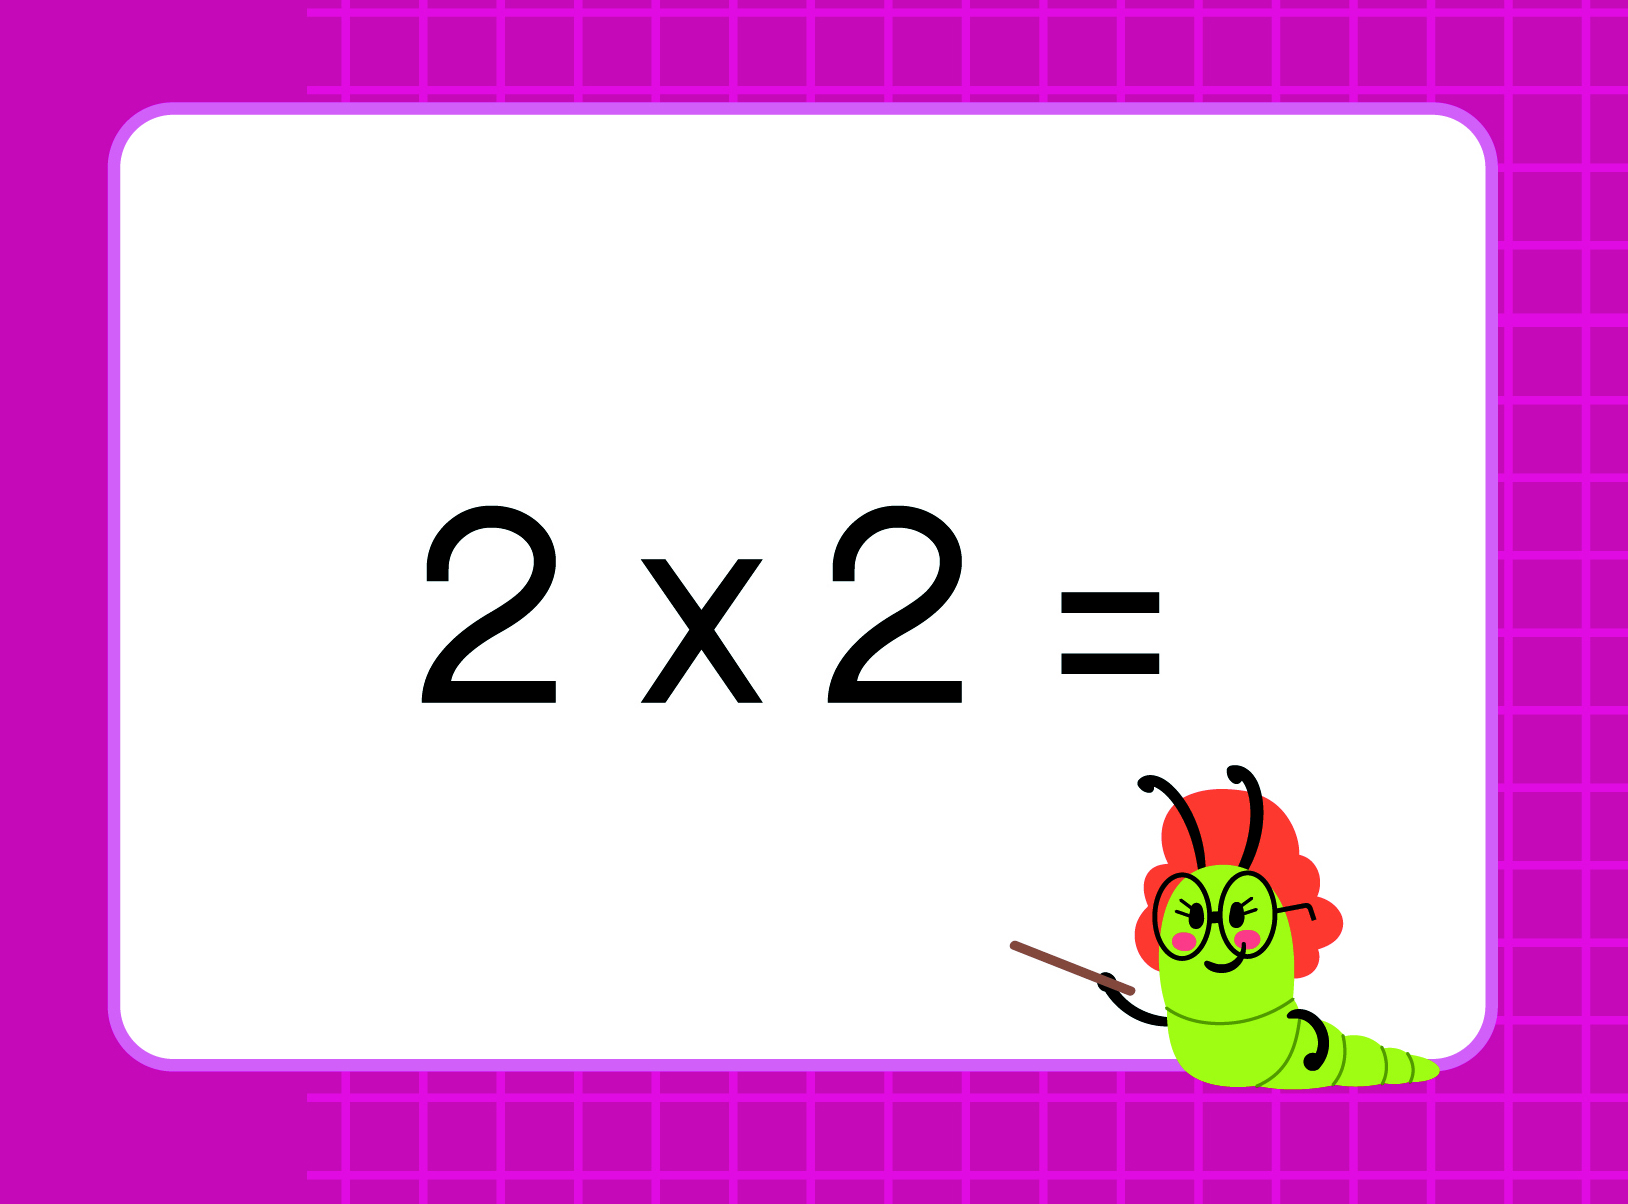 Multiplication & Division Book with Flash Cards